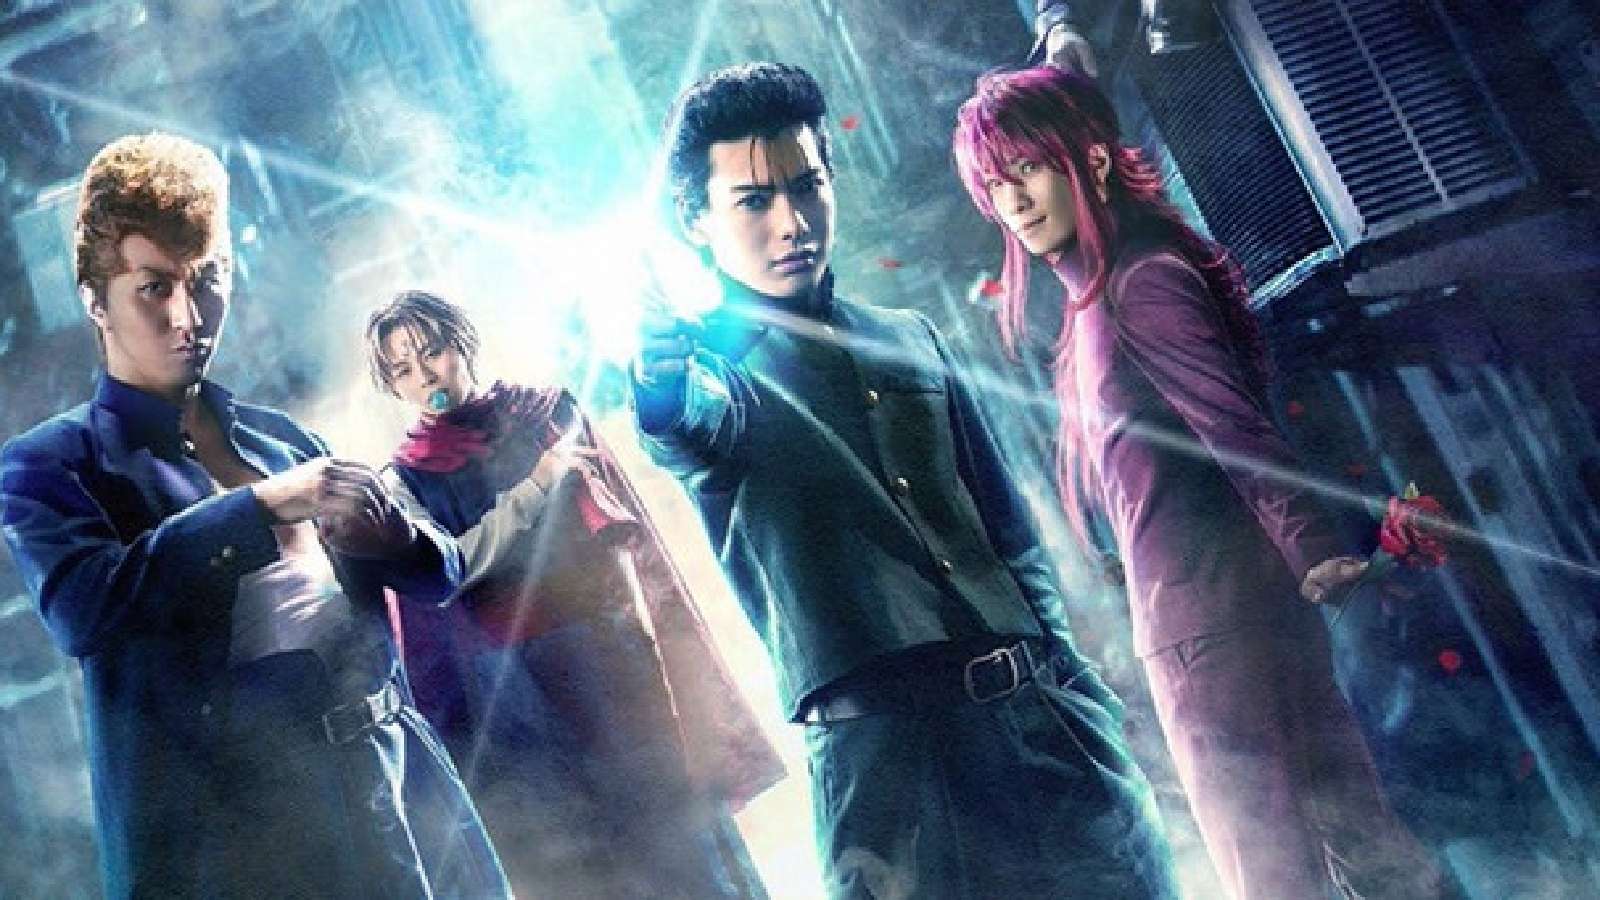 Official release poster for Yu Yu Hakusho